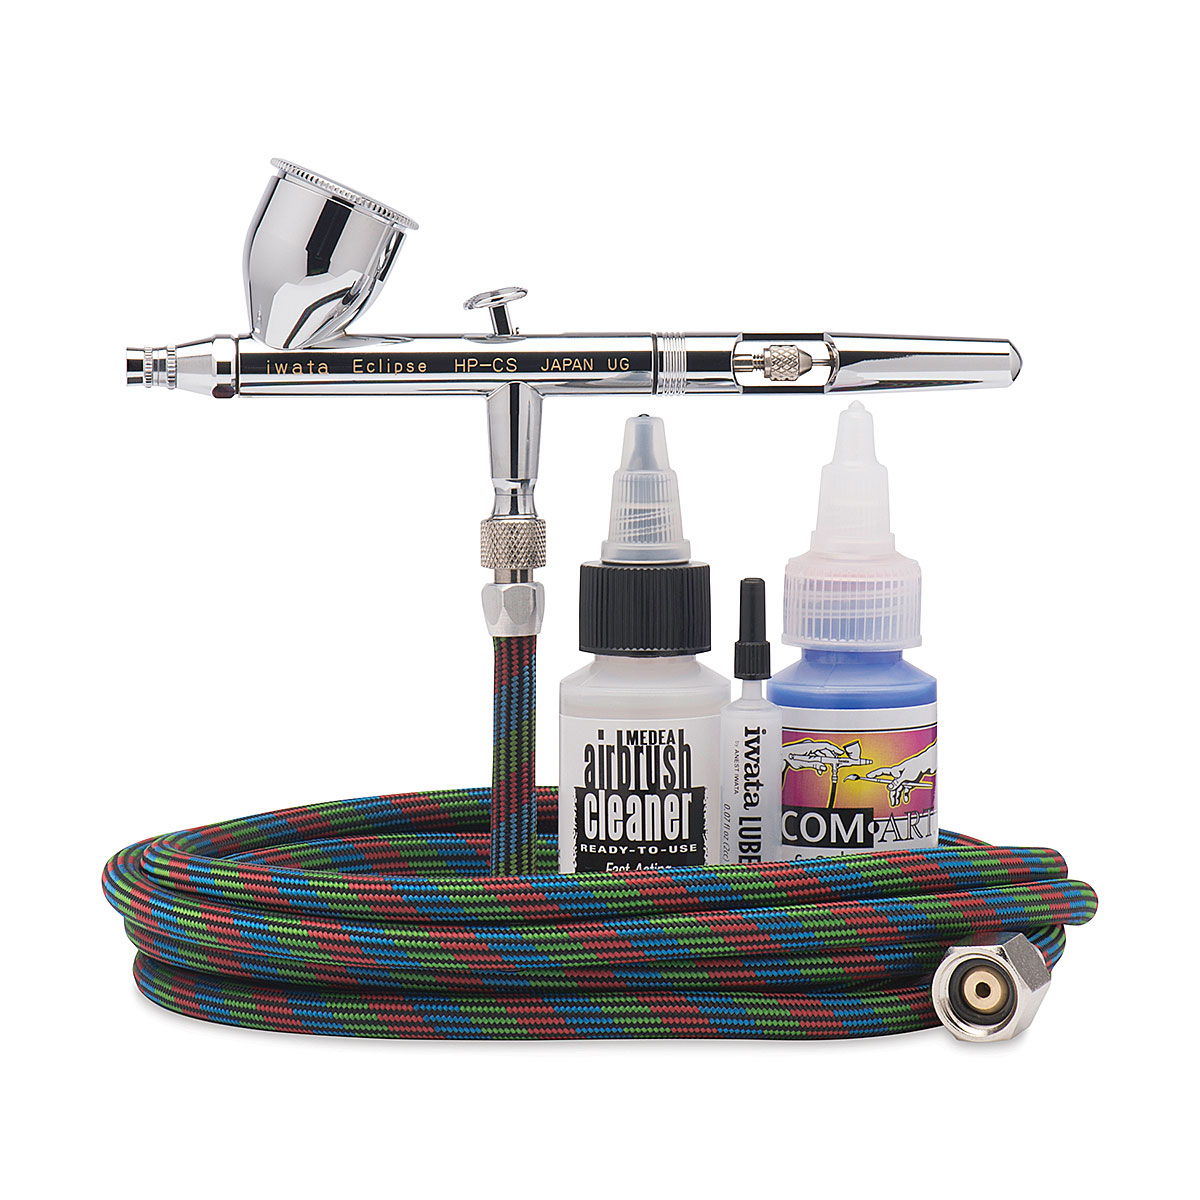 Iwata Eclipse Airbrush Parts — Midwest Airbrush Supply Co